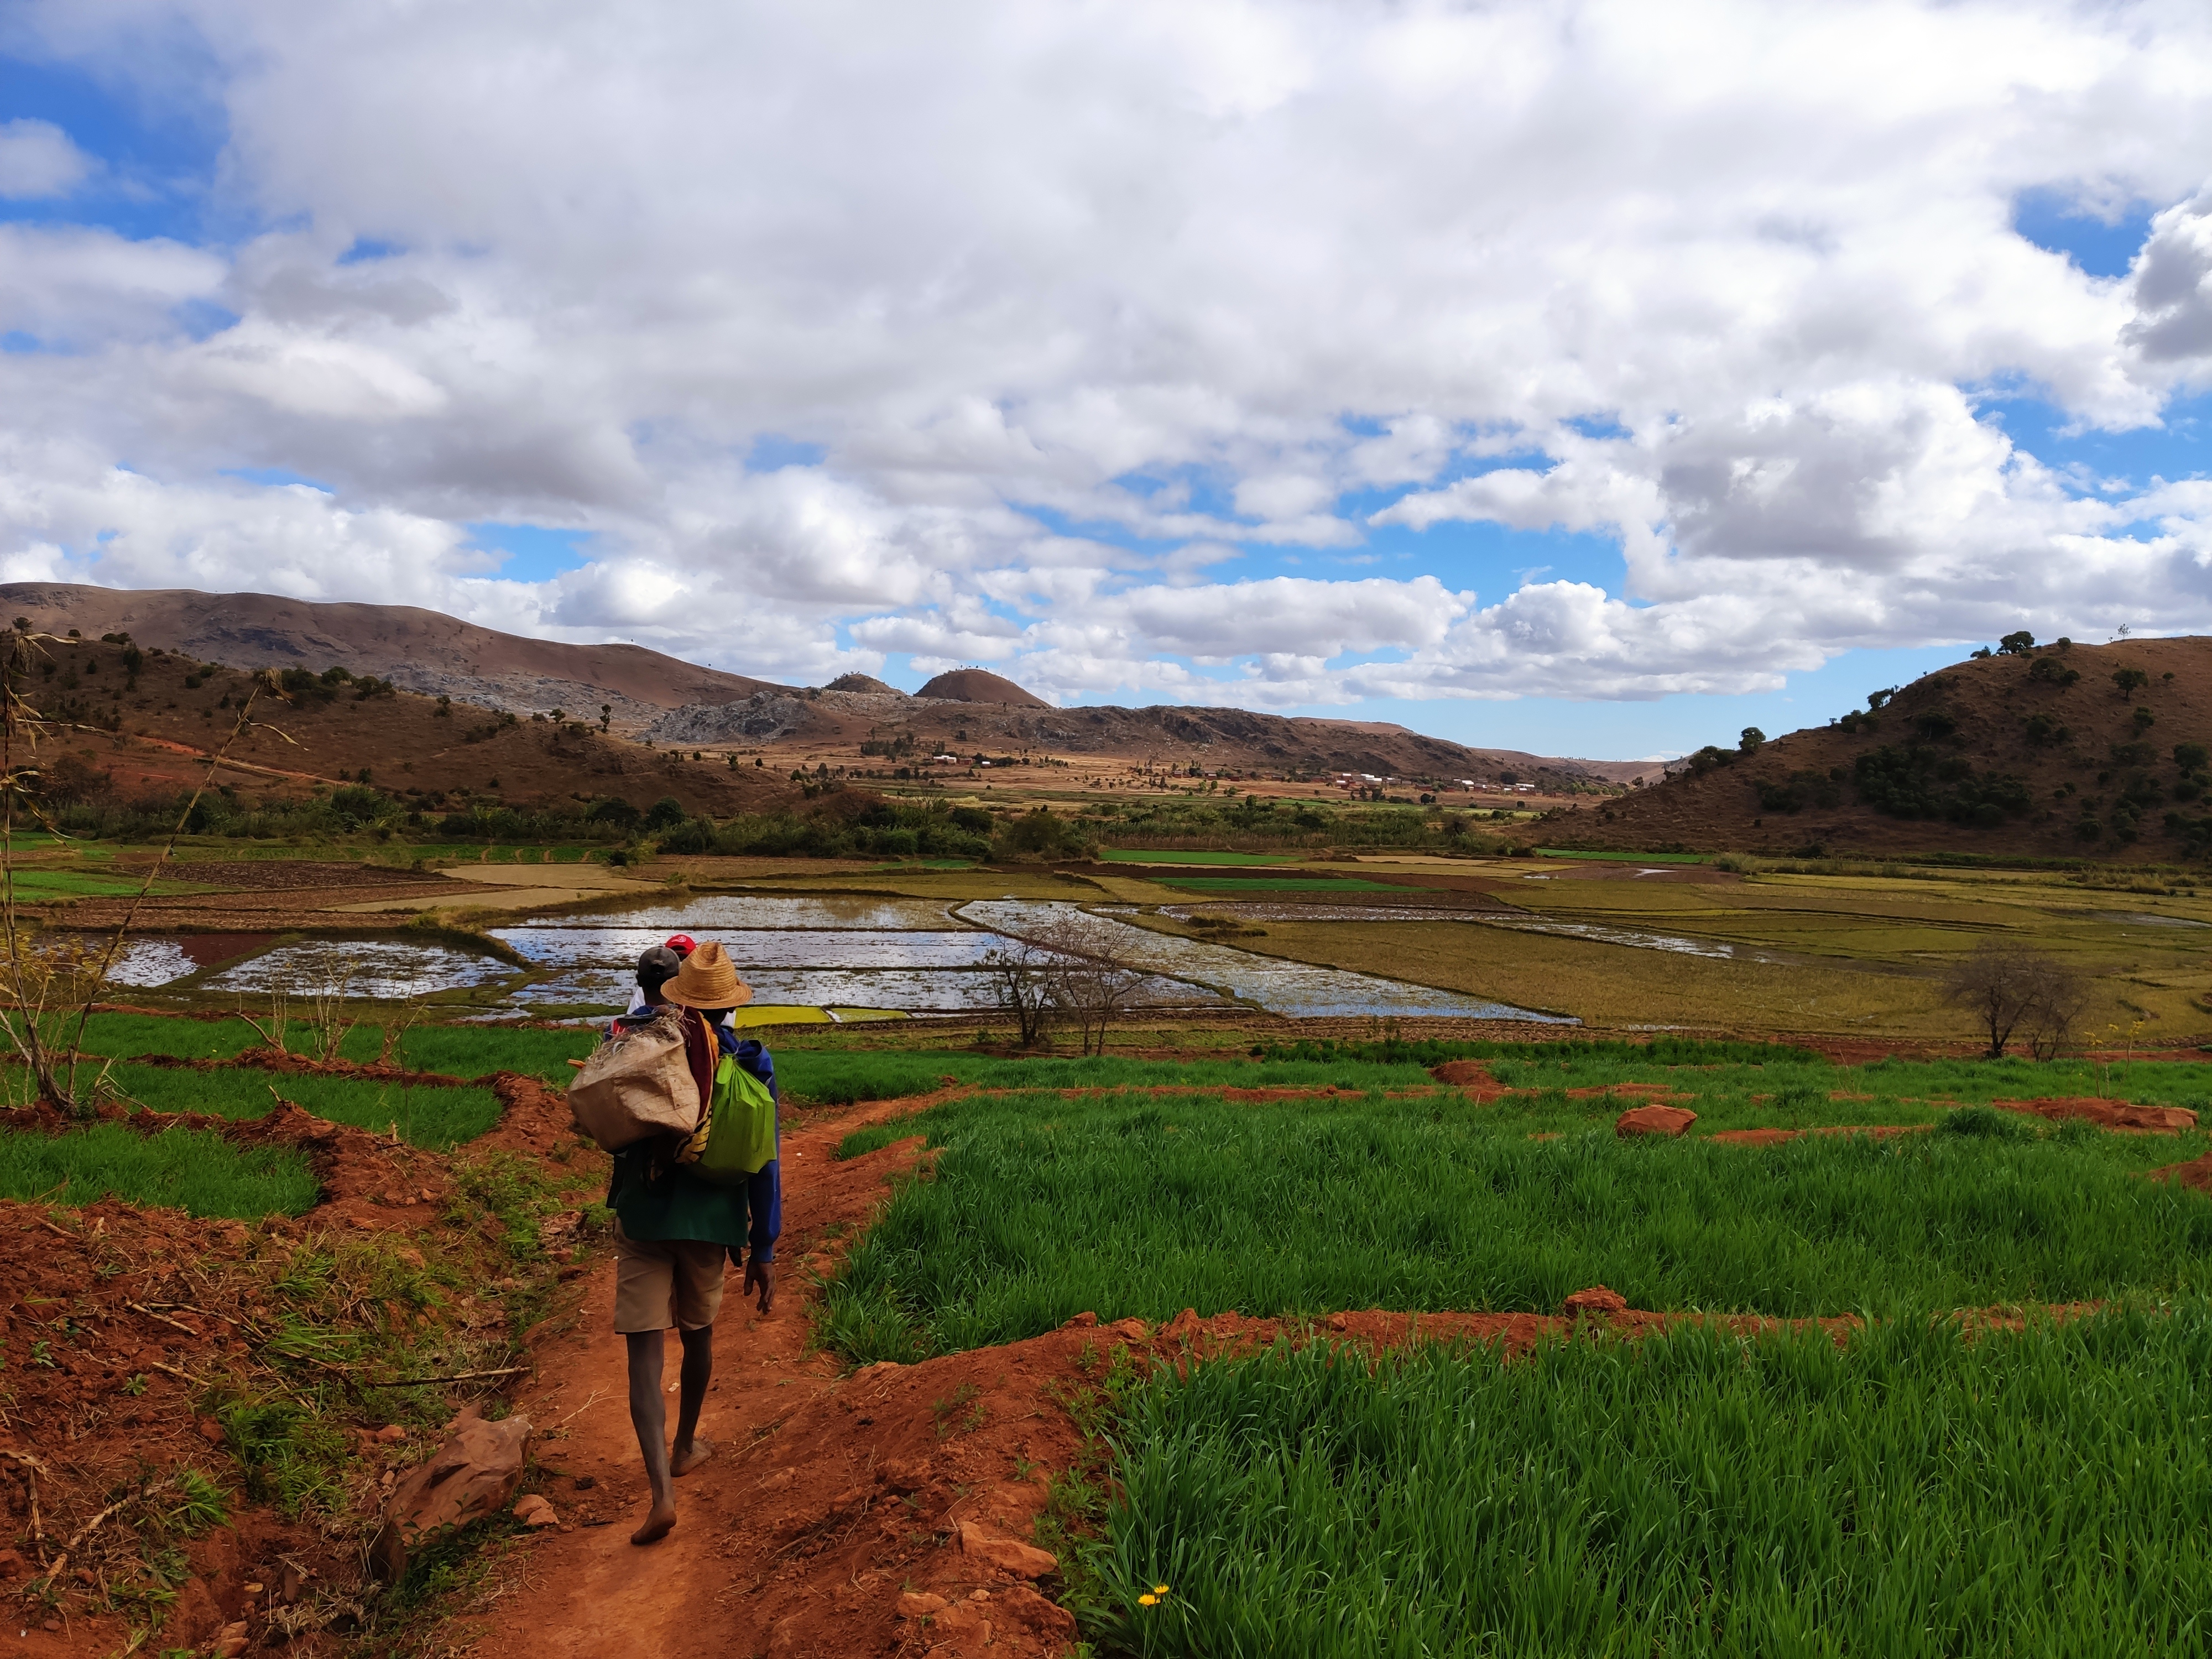 Heading home but coming back: community members gracefully navigate the vibrant agricultural landscape. We aim to return to Madagascar, sharing the research findings to empower these communities.